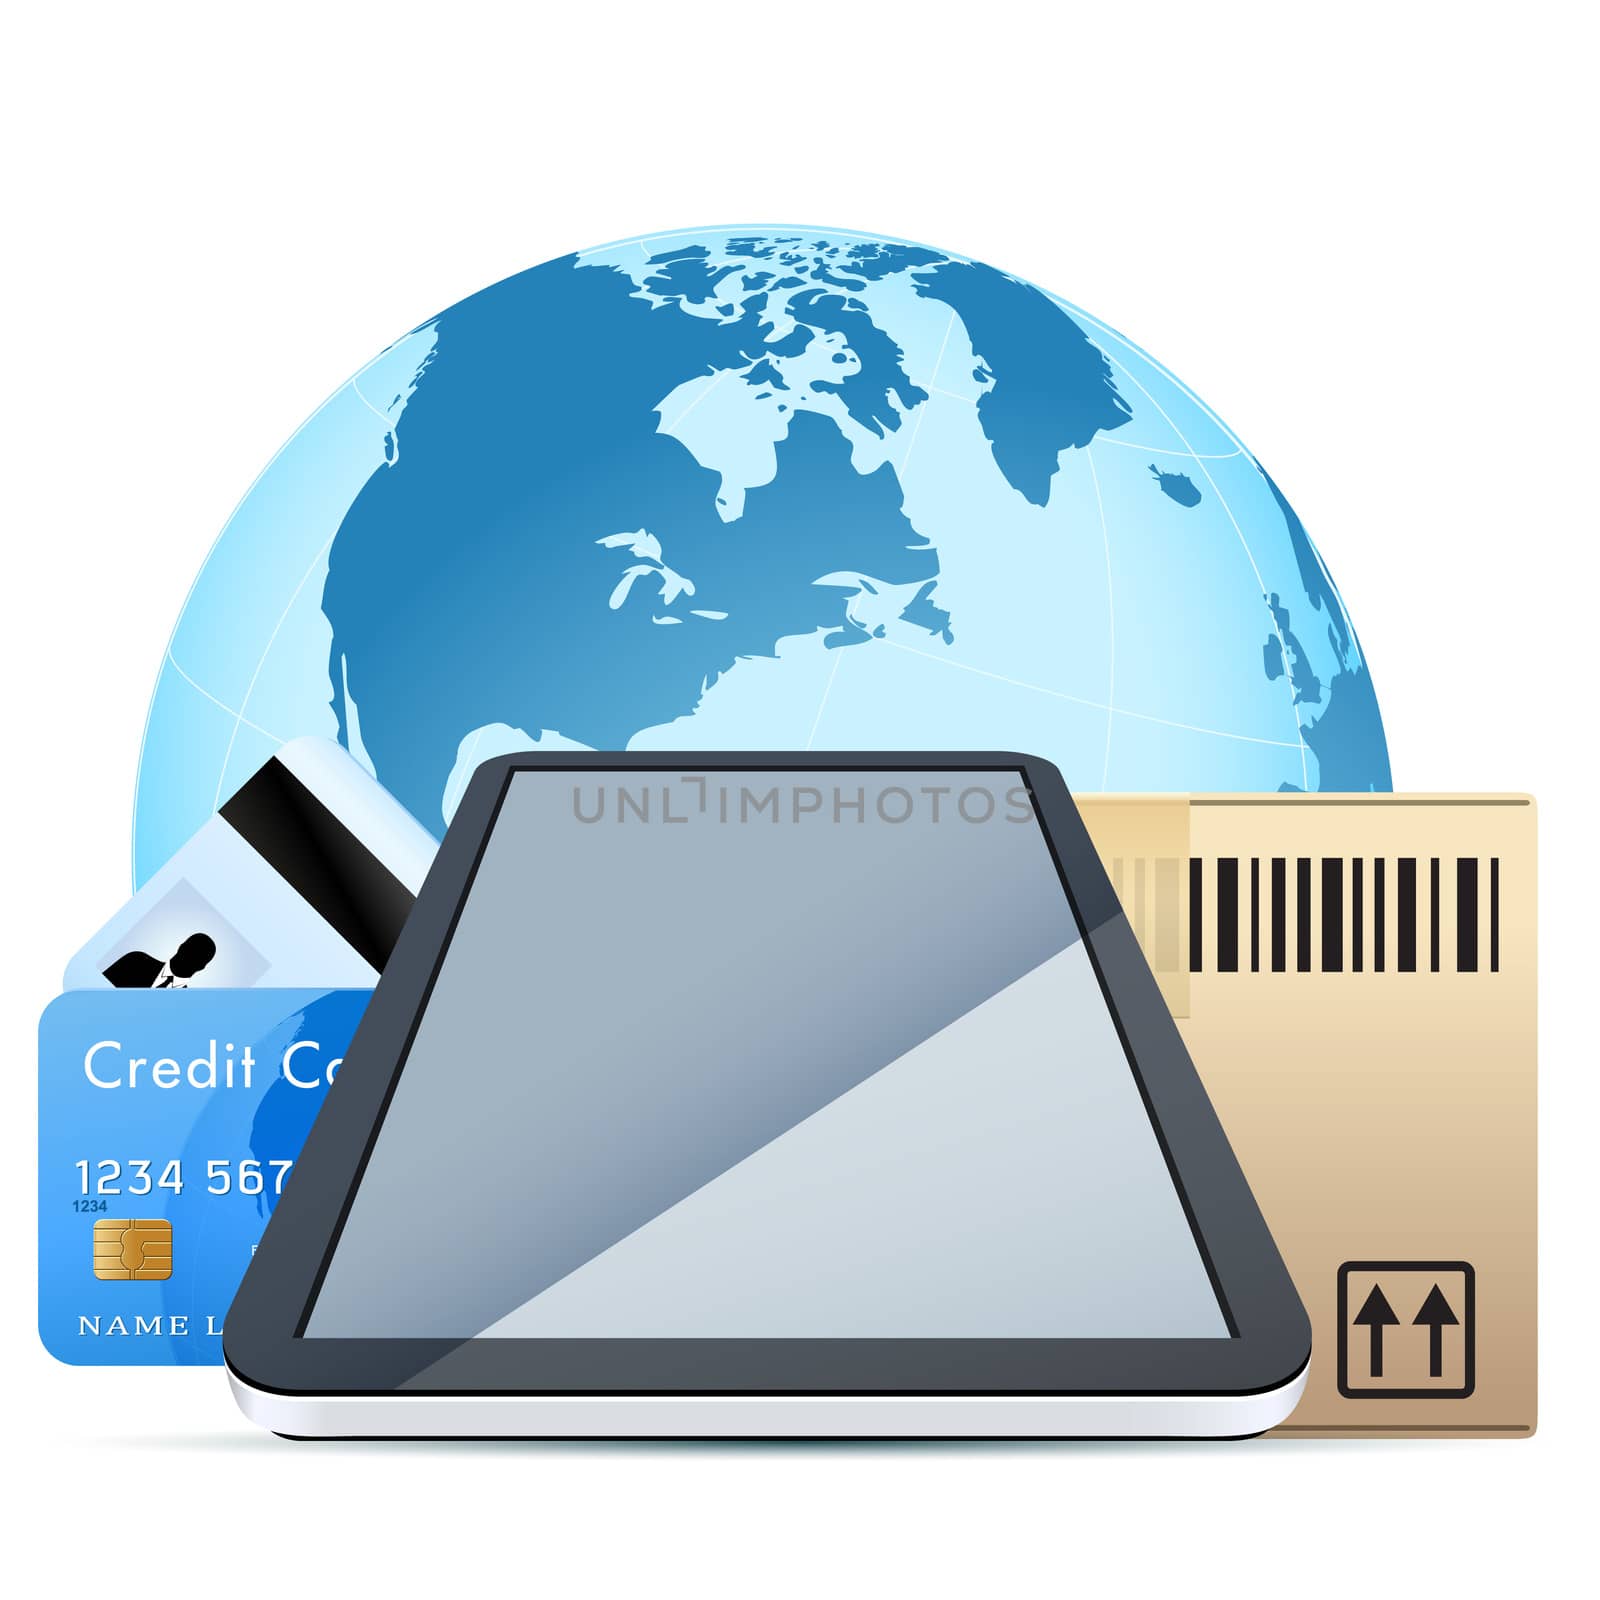 Clear Touch Pad Personal Computer with Cardboard Box and Bank Cards over Earth Globe isolater on white background